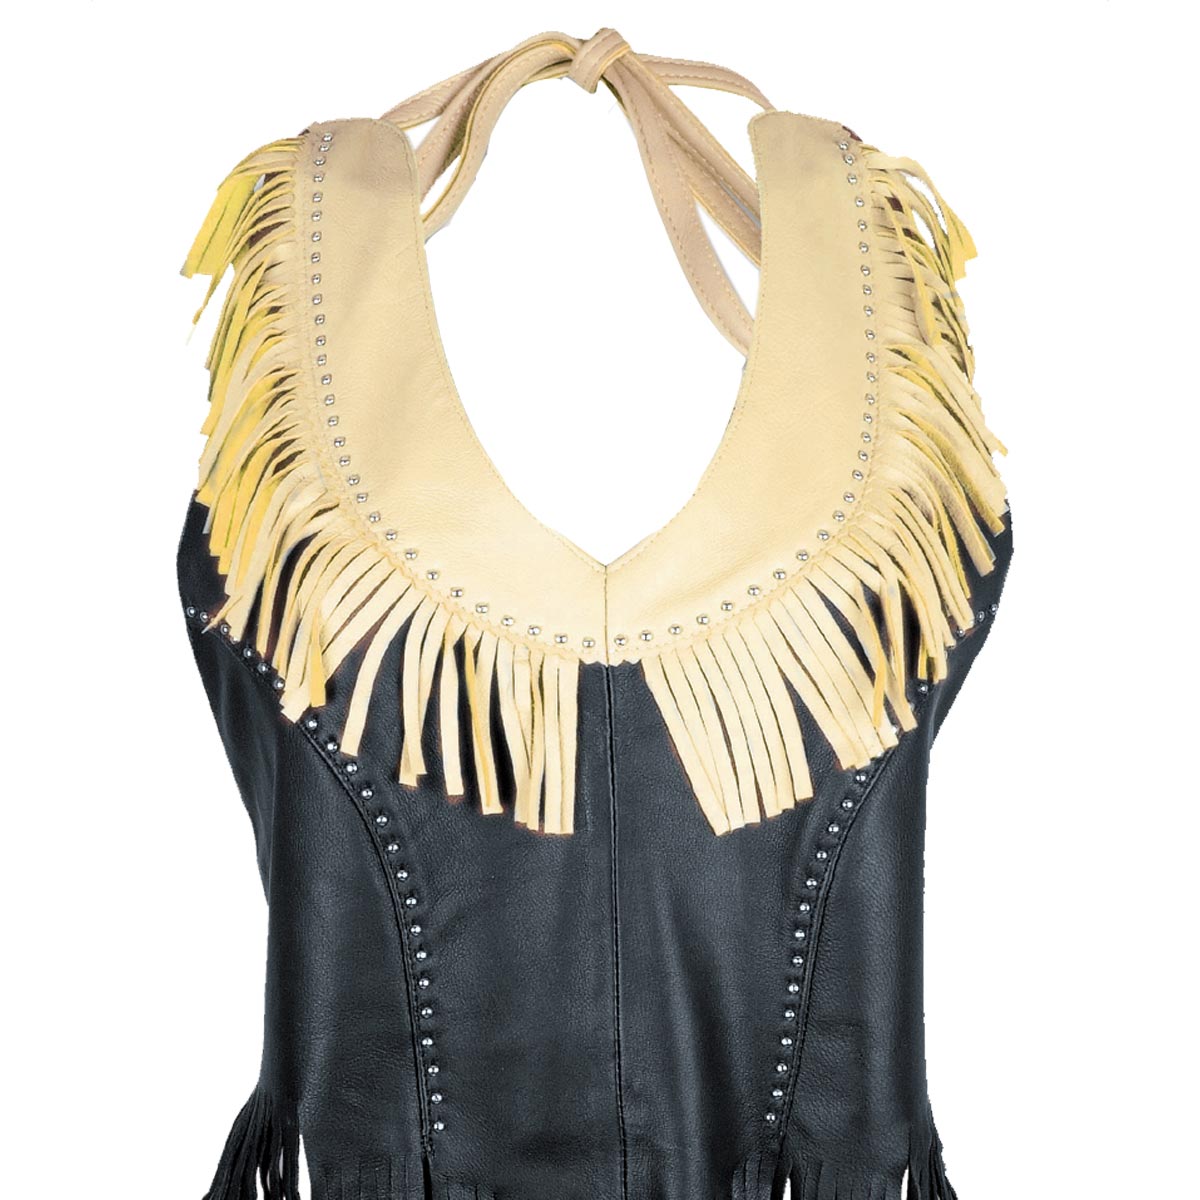 Genuine Leather ML1898 Ladies ‘Fringed’ Two Tone Black and Beige Leather Halter Top